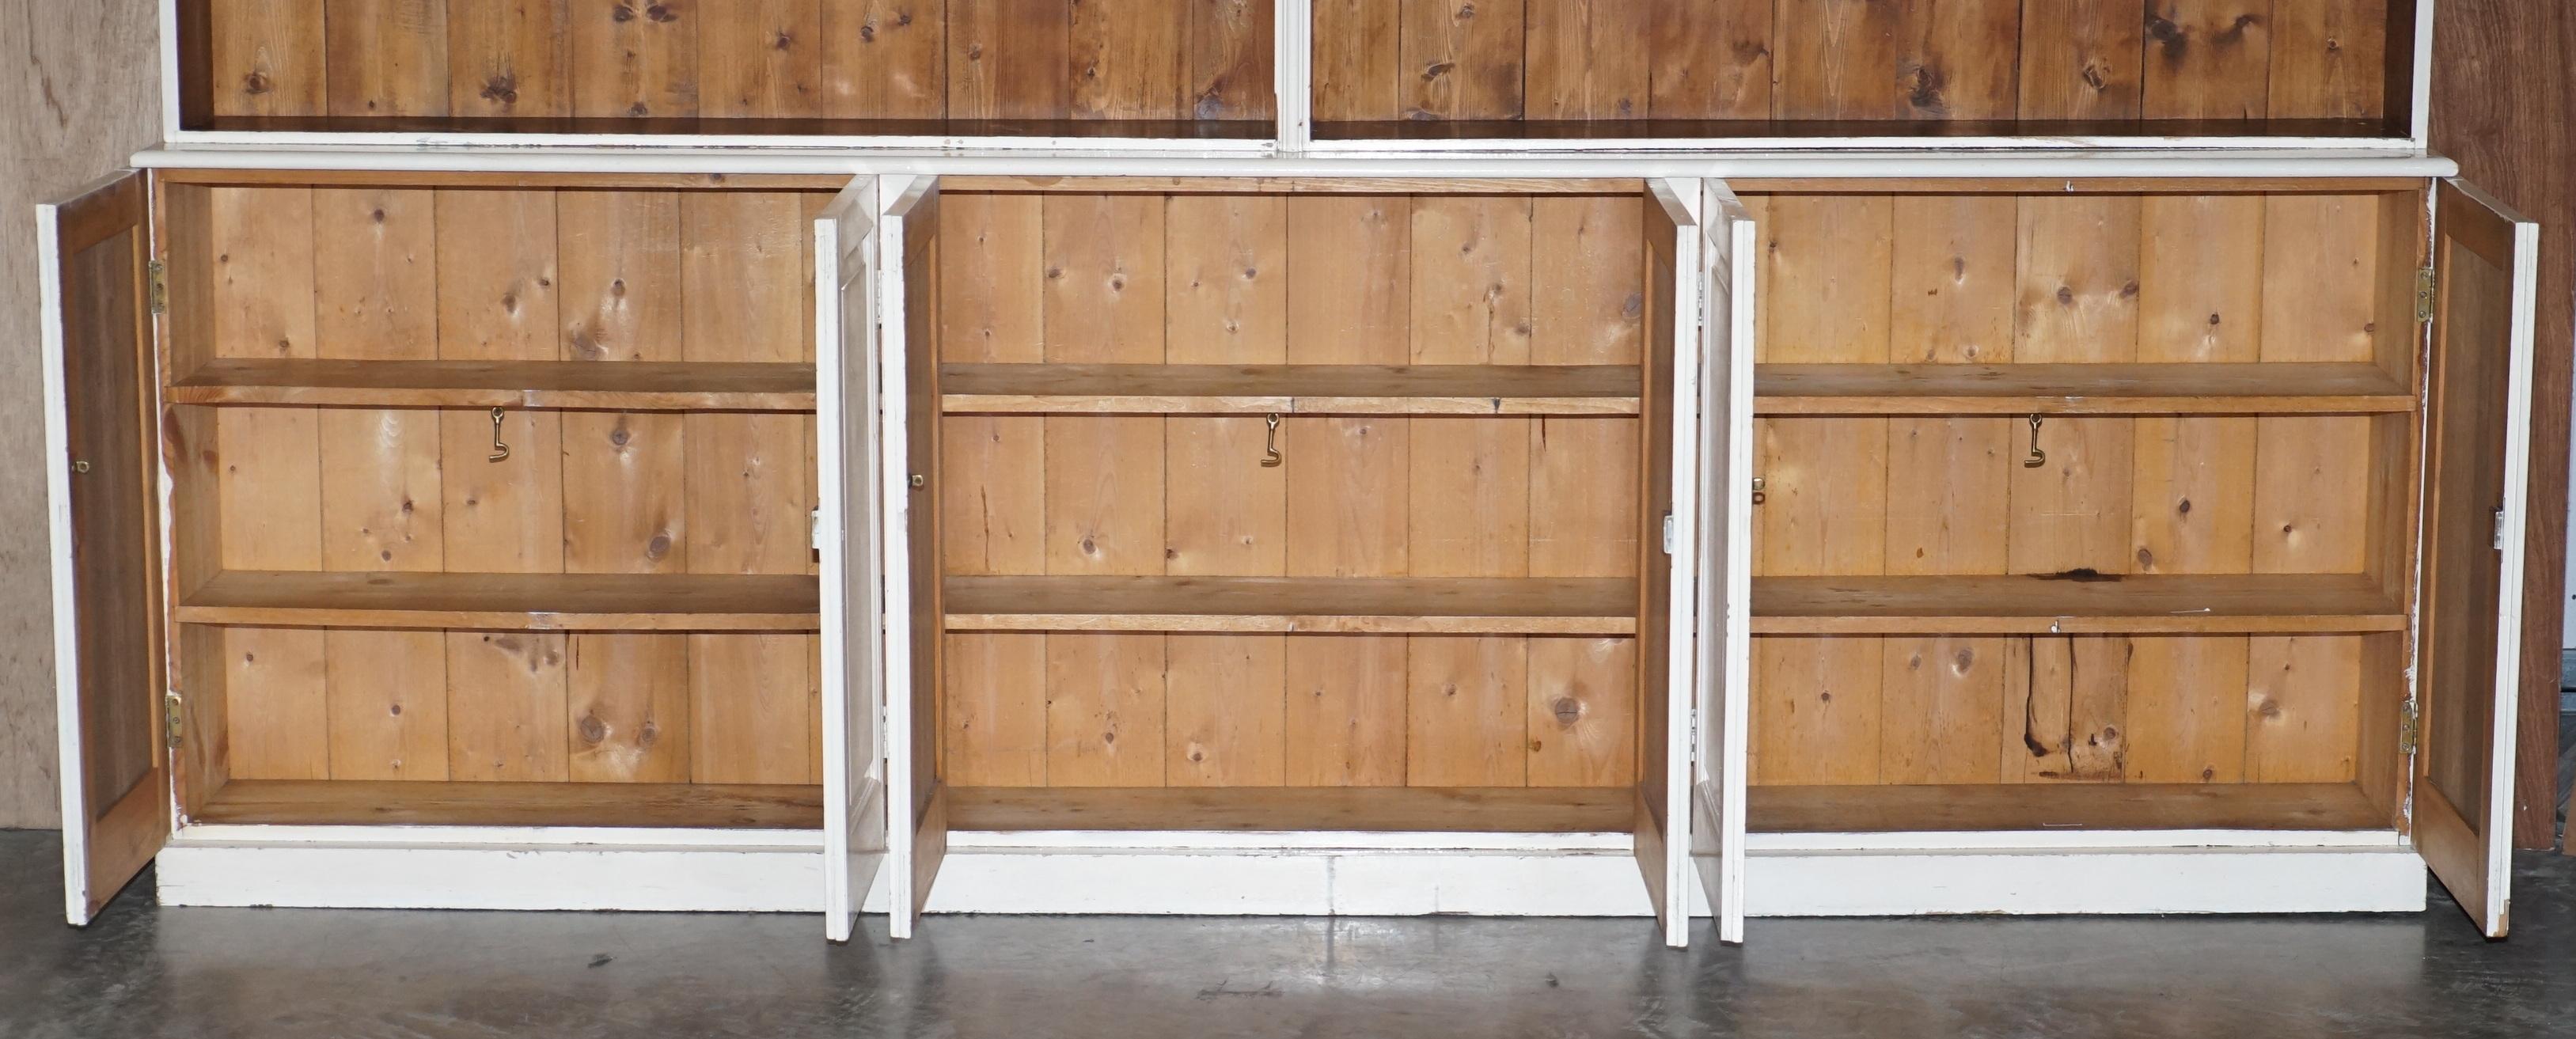 Antique Victorian circa 1880 Pitch Pine Bookcase with Vintage, circa 1950 Paint For Sale 7